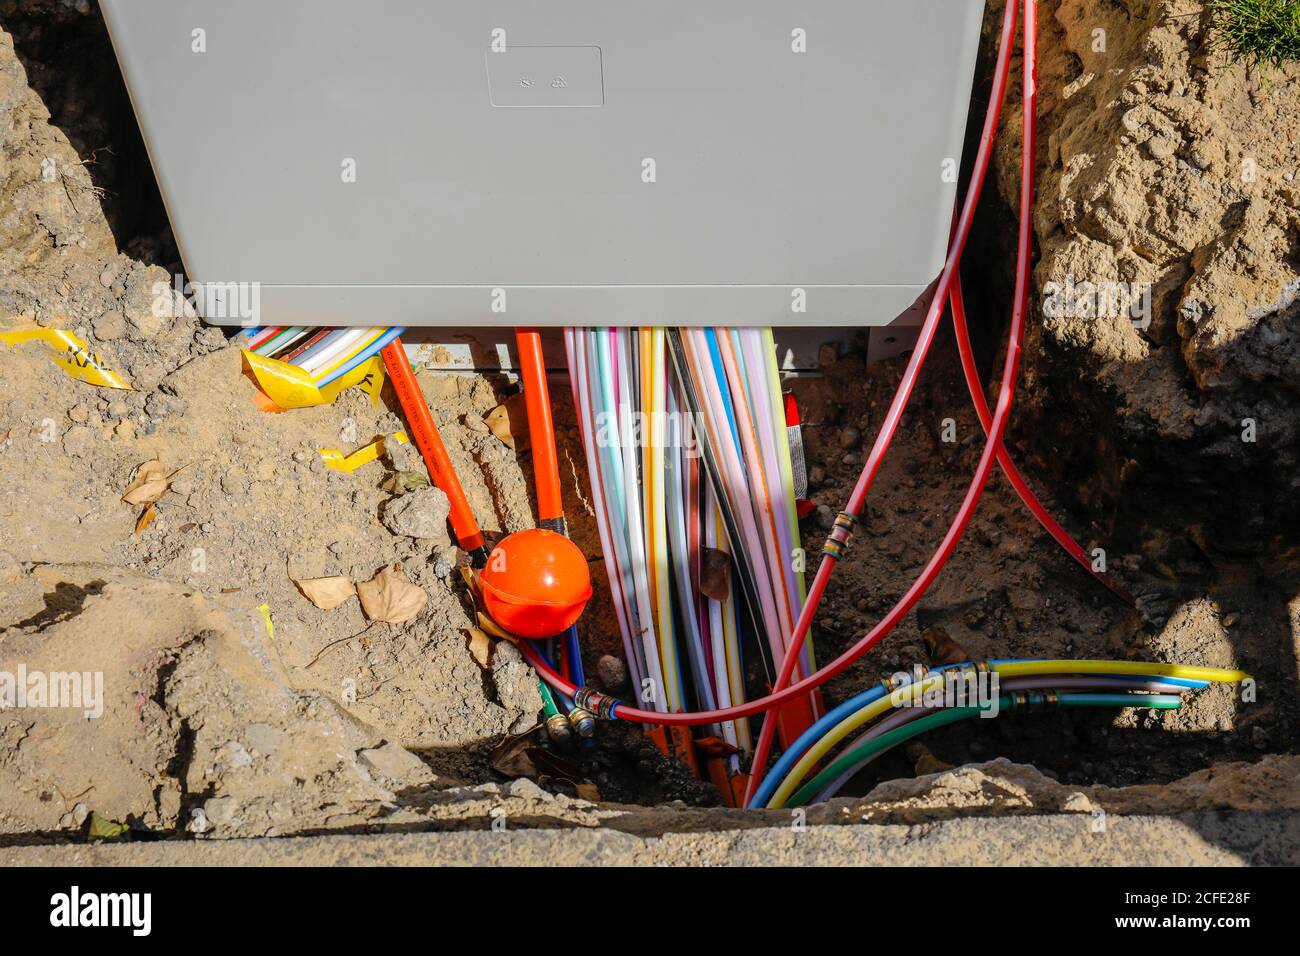 Telekom distribution box for fast internet, construction site DSL cable connection for households, Datteln, North Rhine-Westphalia, Germany Stock Photo